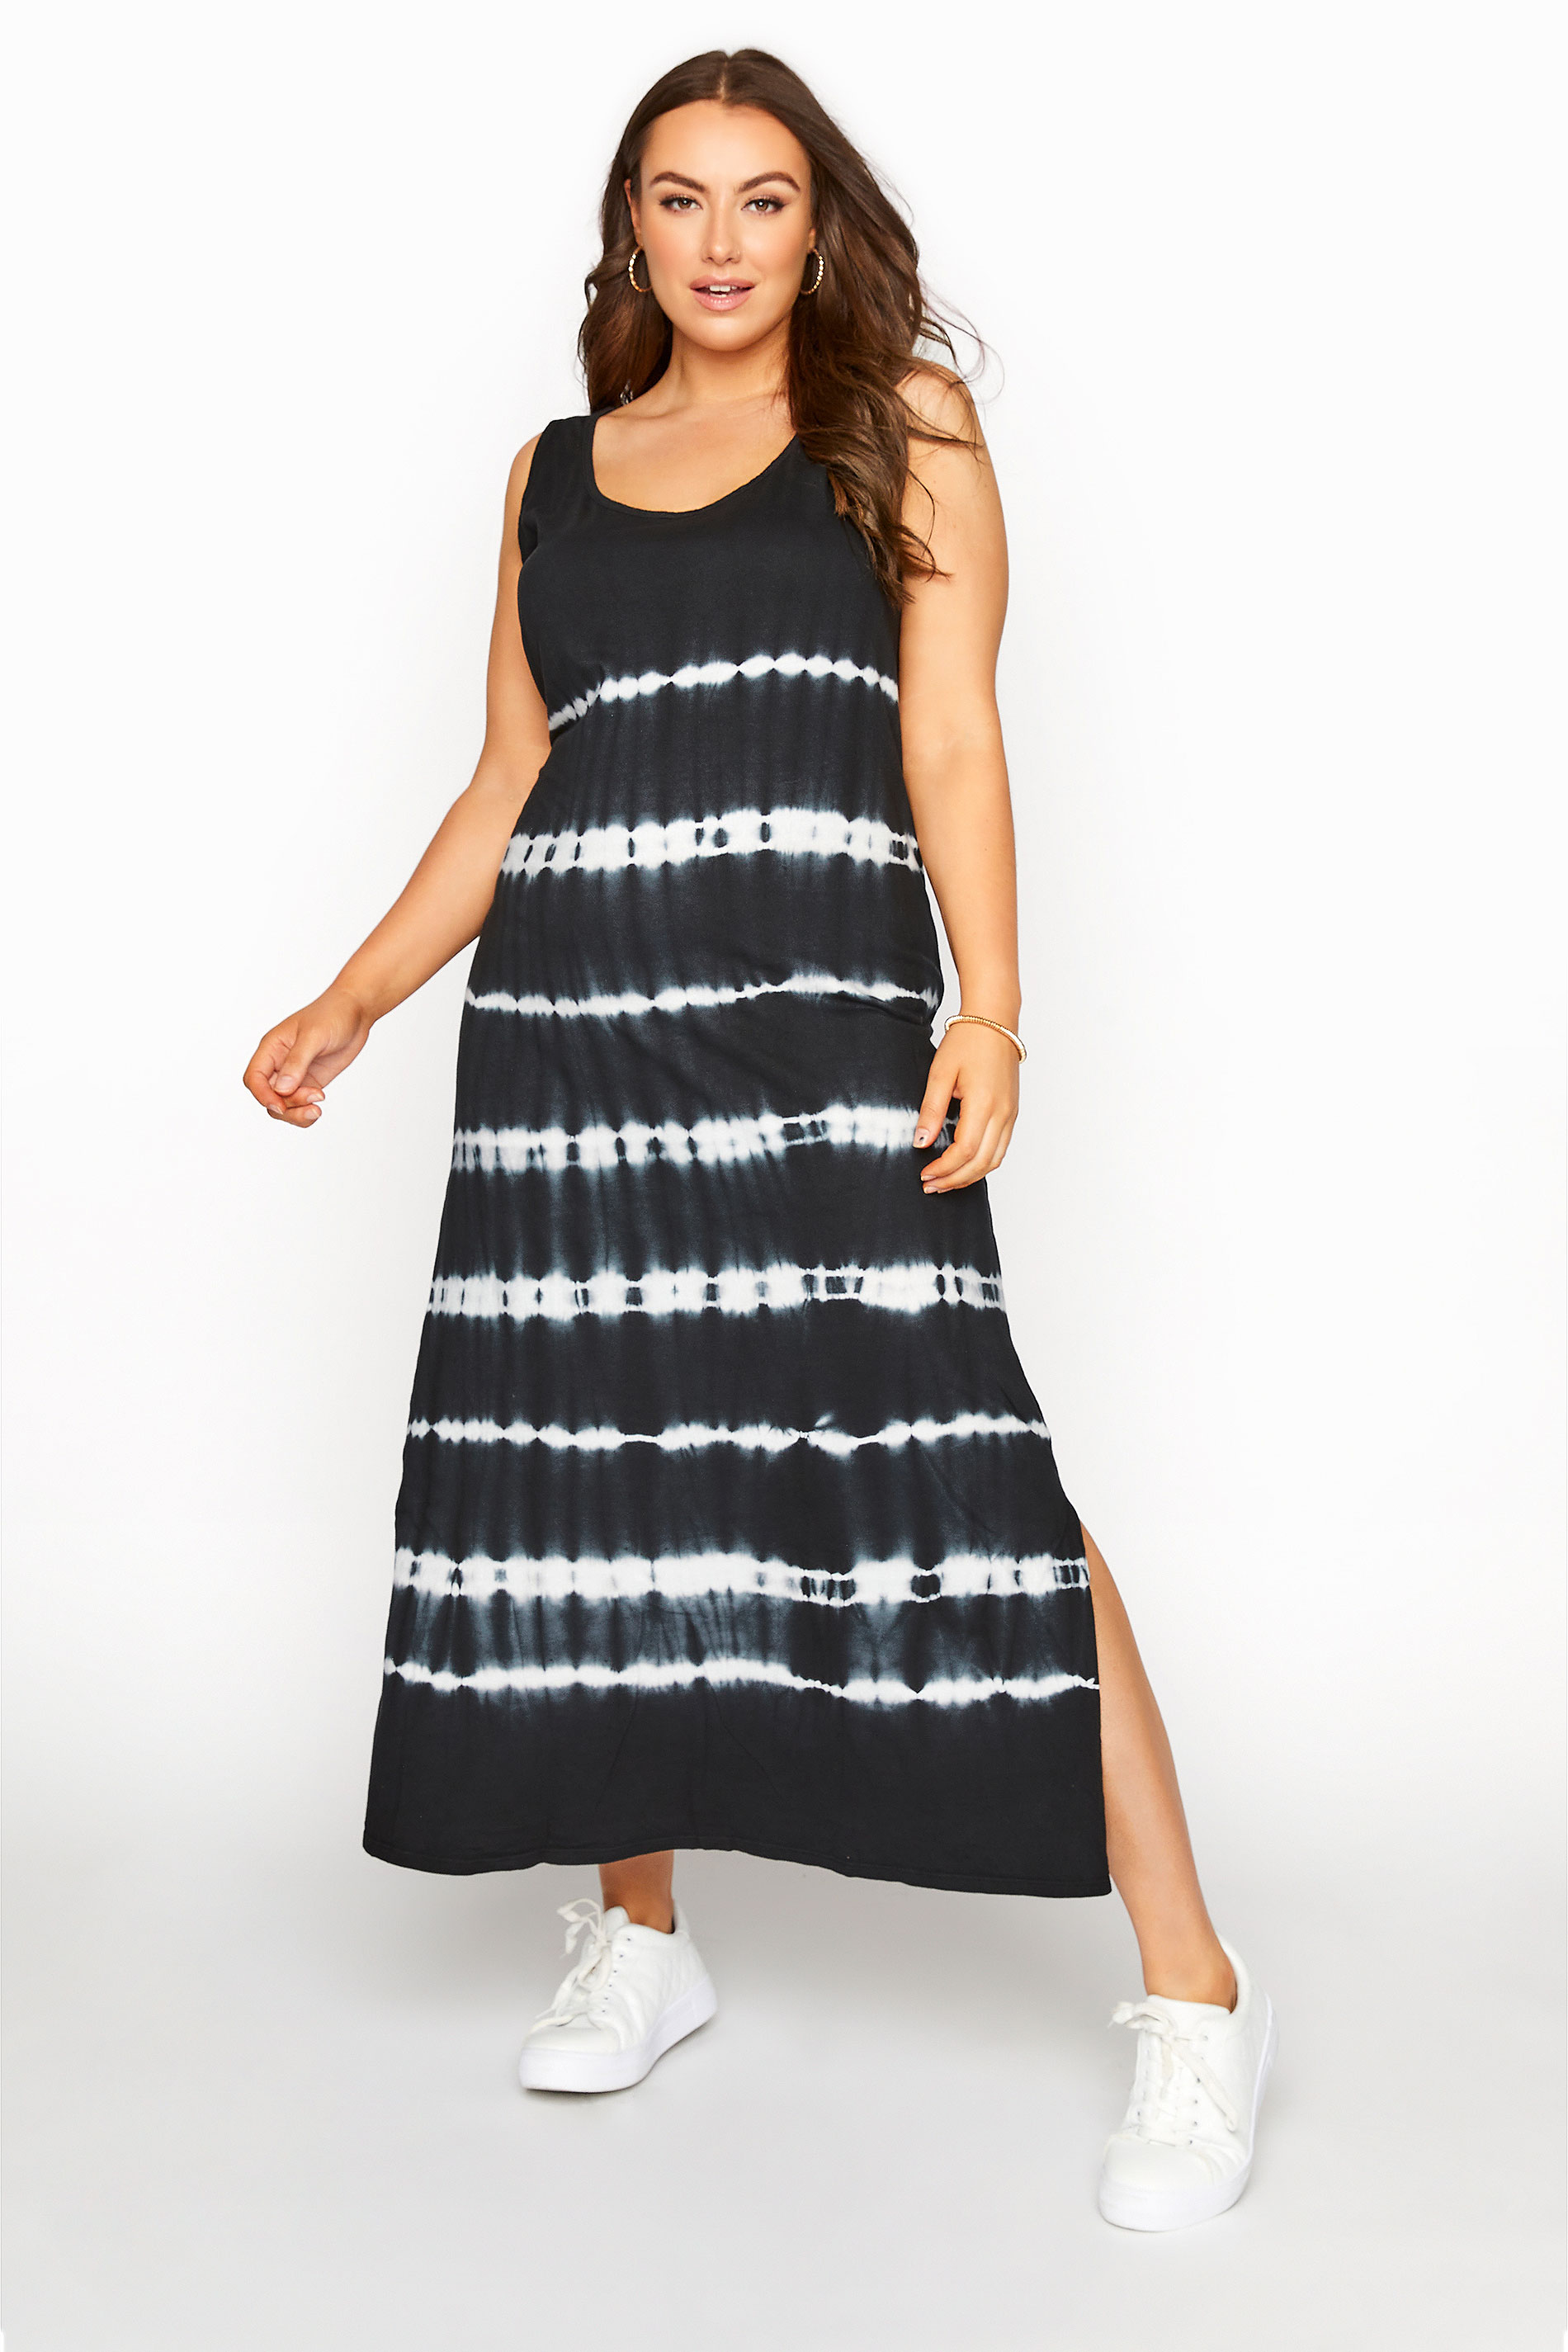 Robes Grande Taille Grande taille  Robes Longues | Robe Noire Maxi Style Tie & Dye - SZ49747